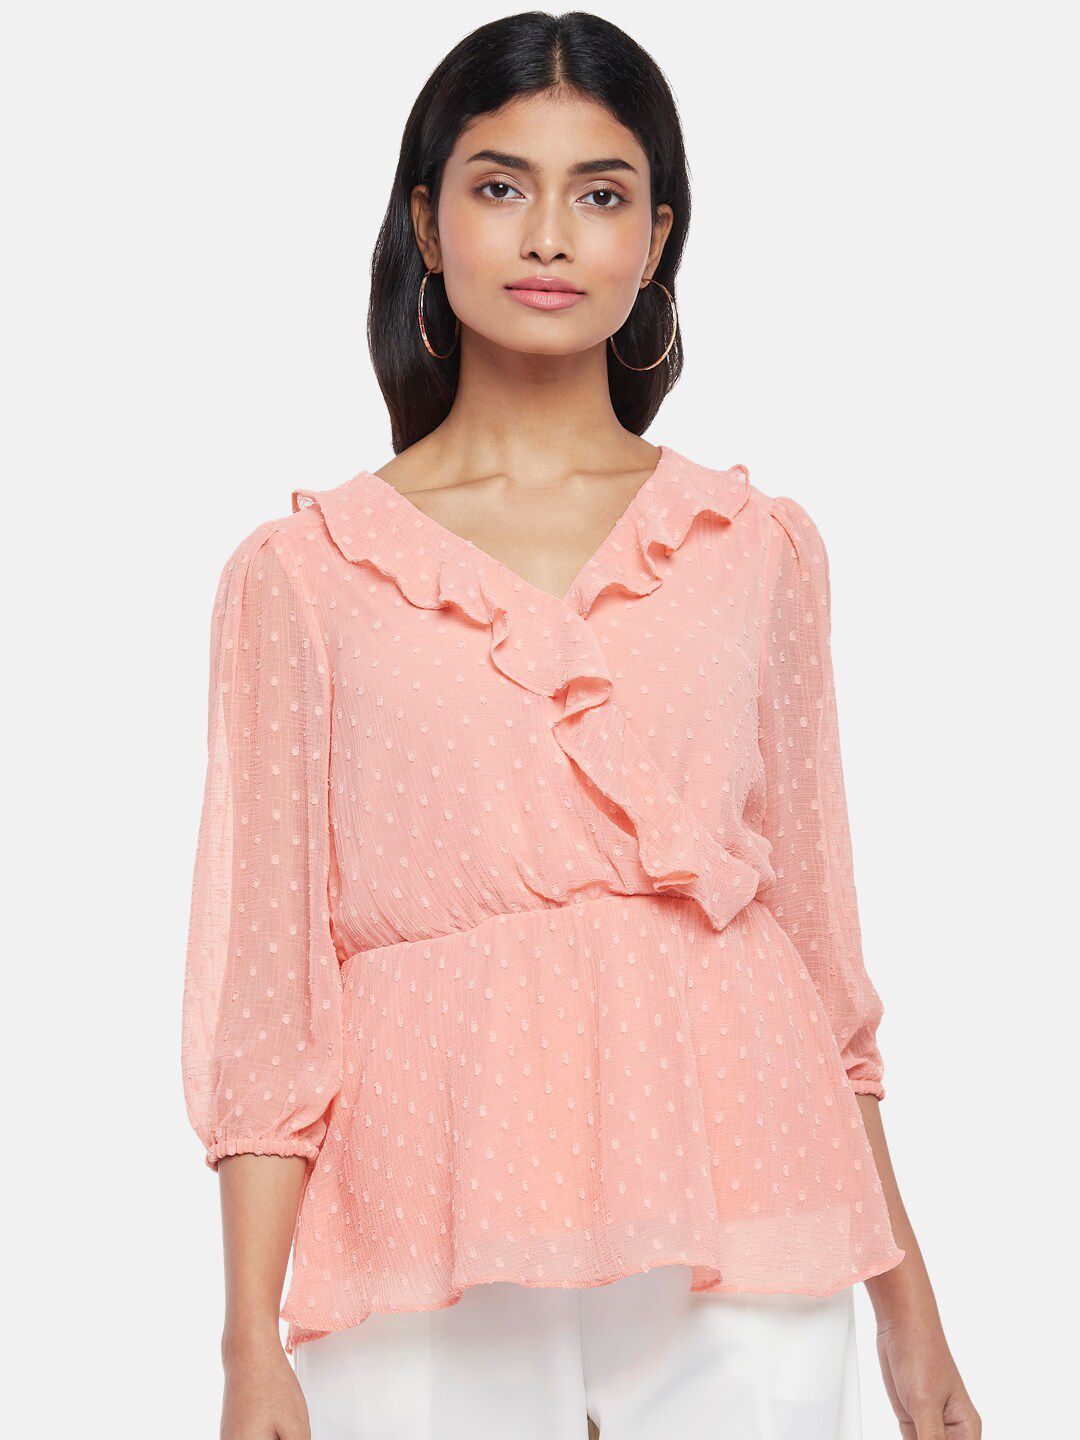 Honey by Pantaloons Women Peach-Coloured Cinched Waist Top Price in India